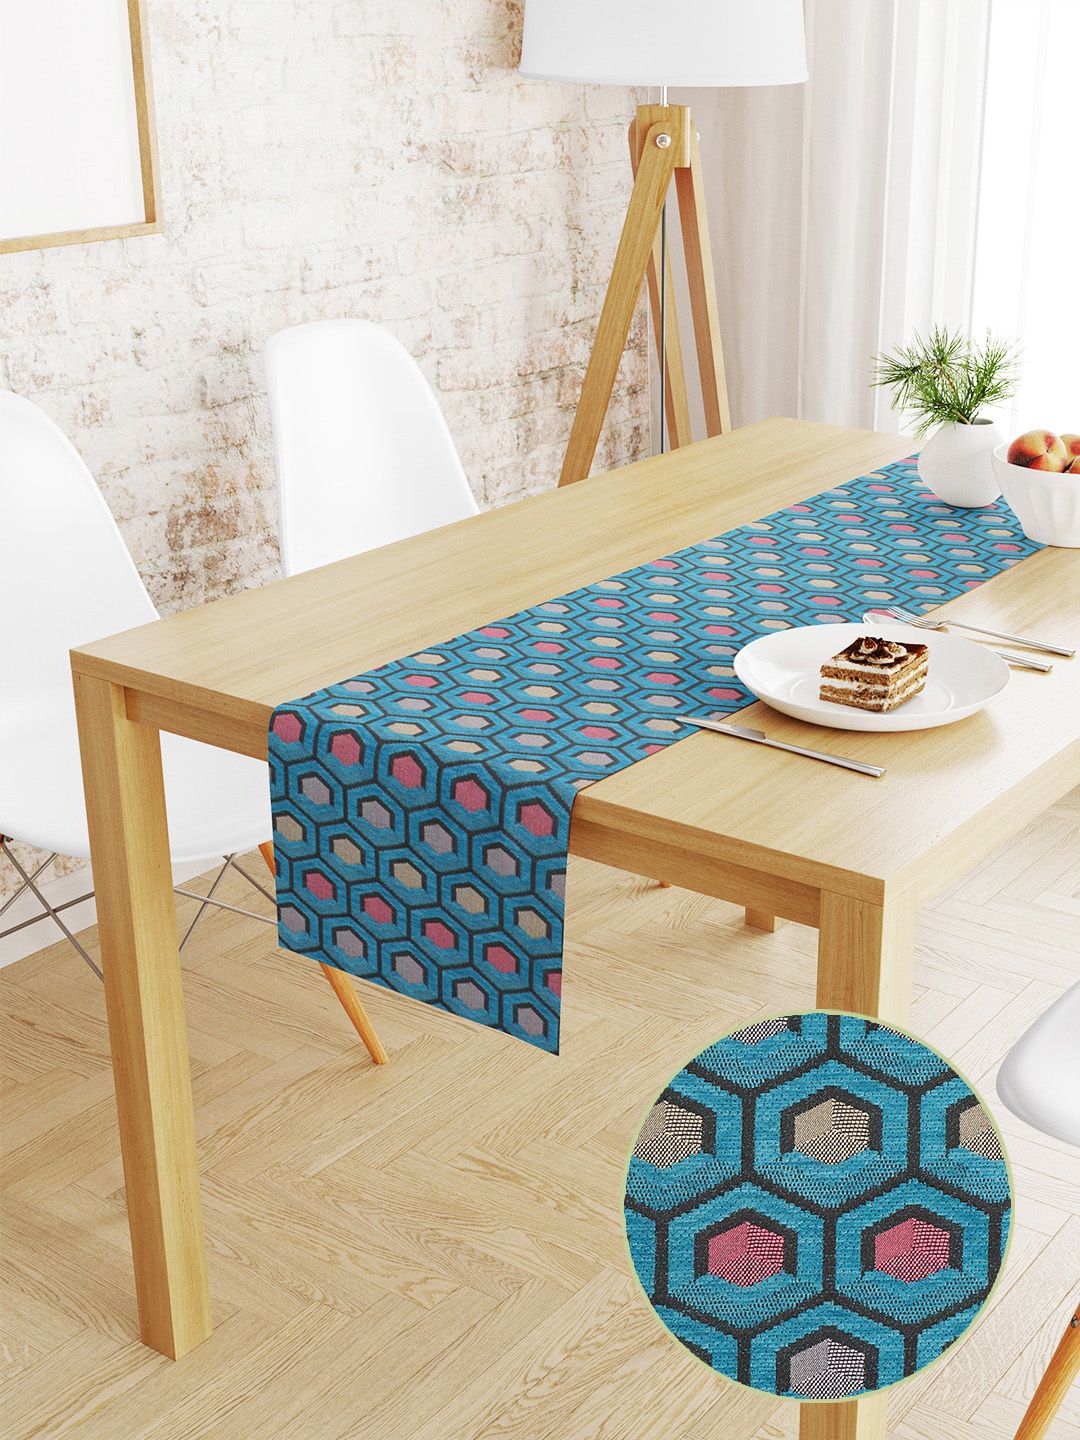 S9home by Seasons Turquoise Blue & Black Geometric Chenille Jacquard 6-Seater Table Runner Price in India